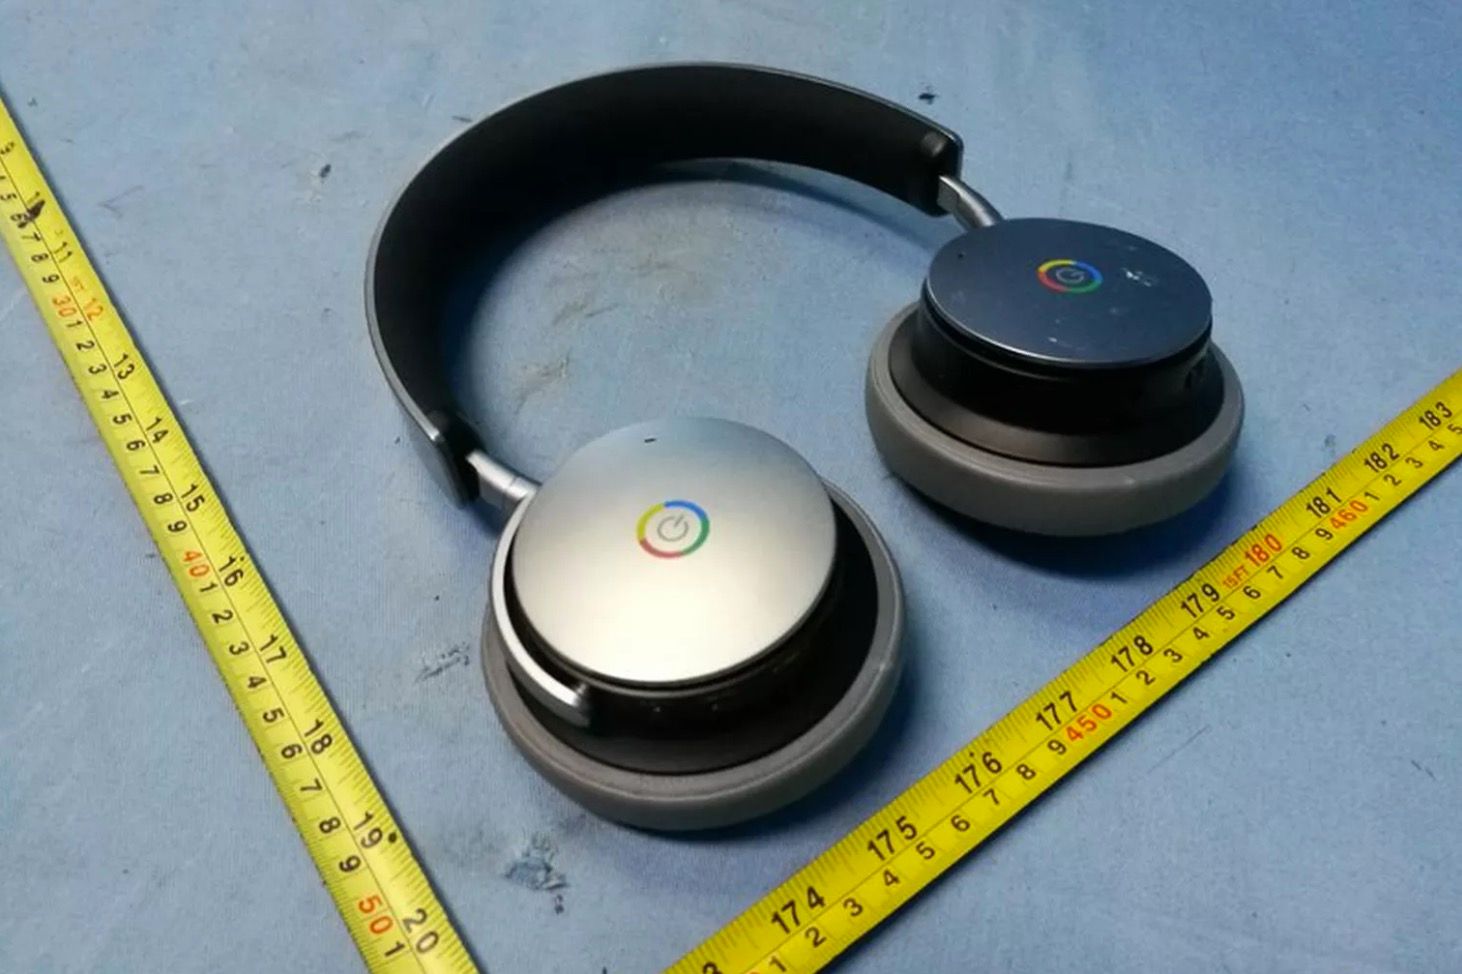 will google launch its own bluetooth headphones soon probably not image 1